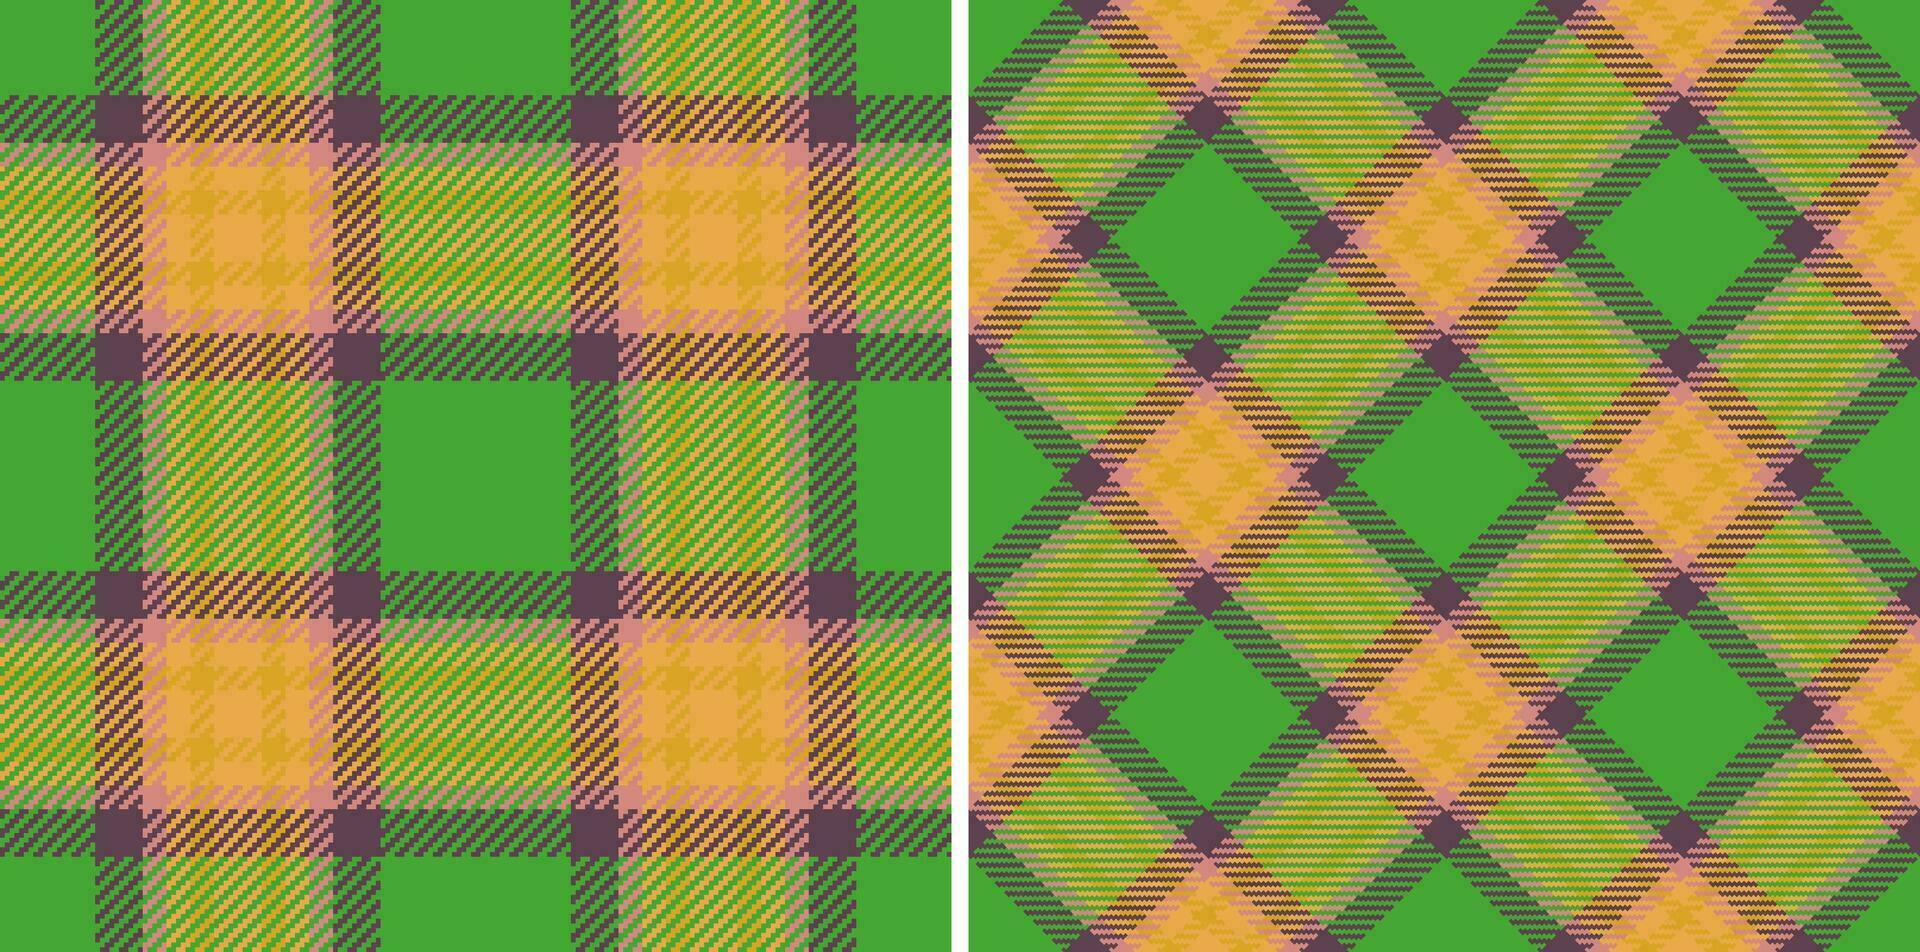 Textile fabric plaid of texture check pattern with a background tartan vector seamless.